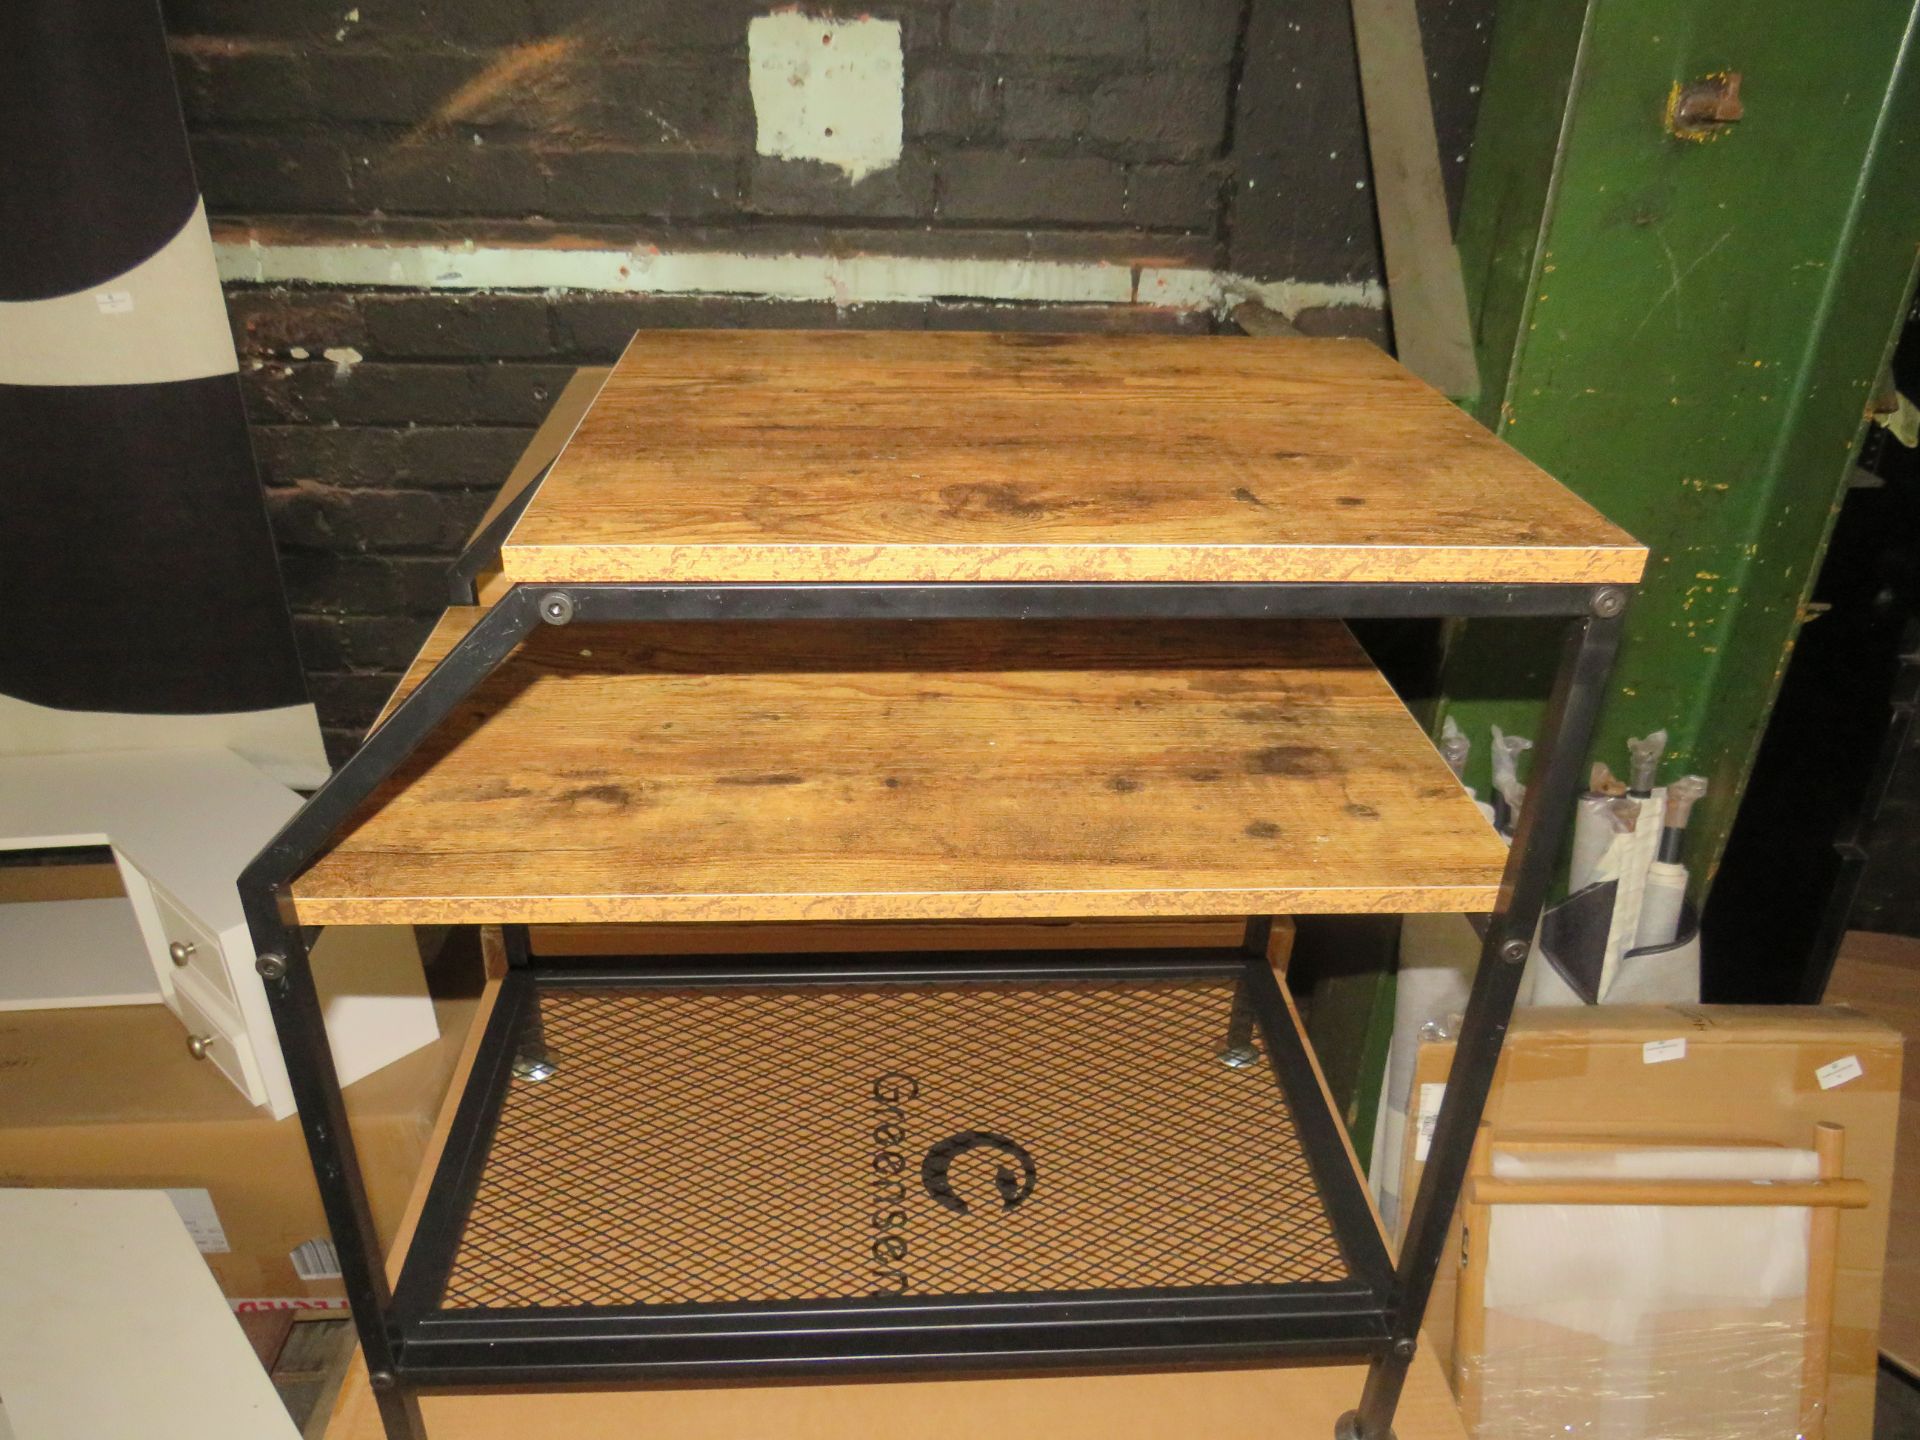 Vintage Industrial Nightstand With Storage Shelves - Good Condition & Boxed.